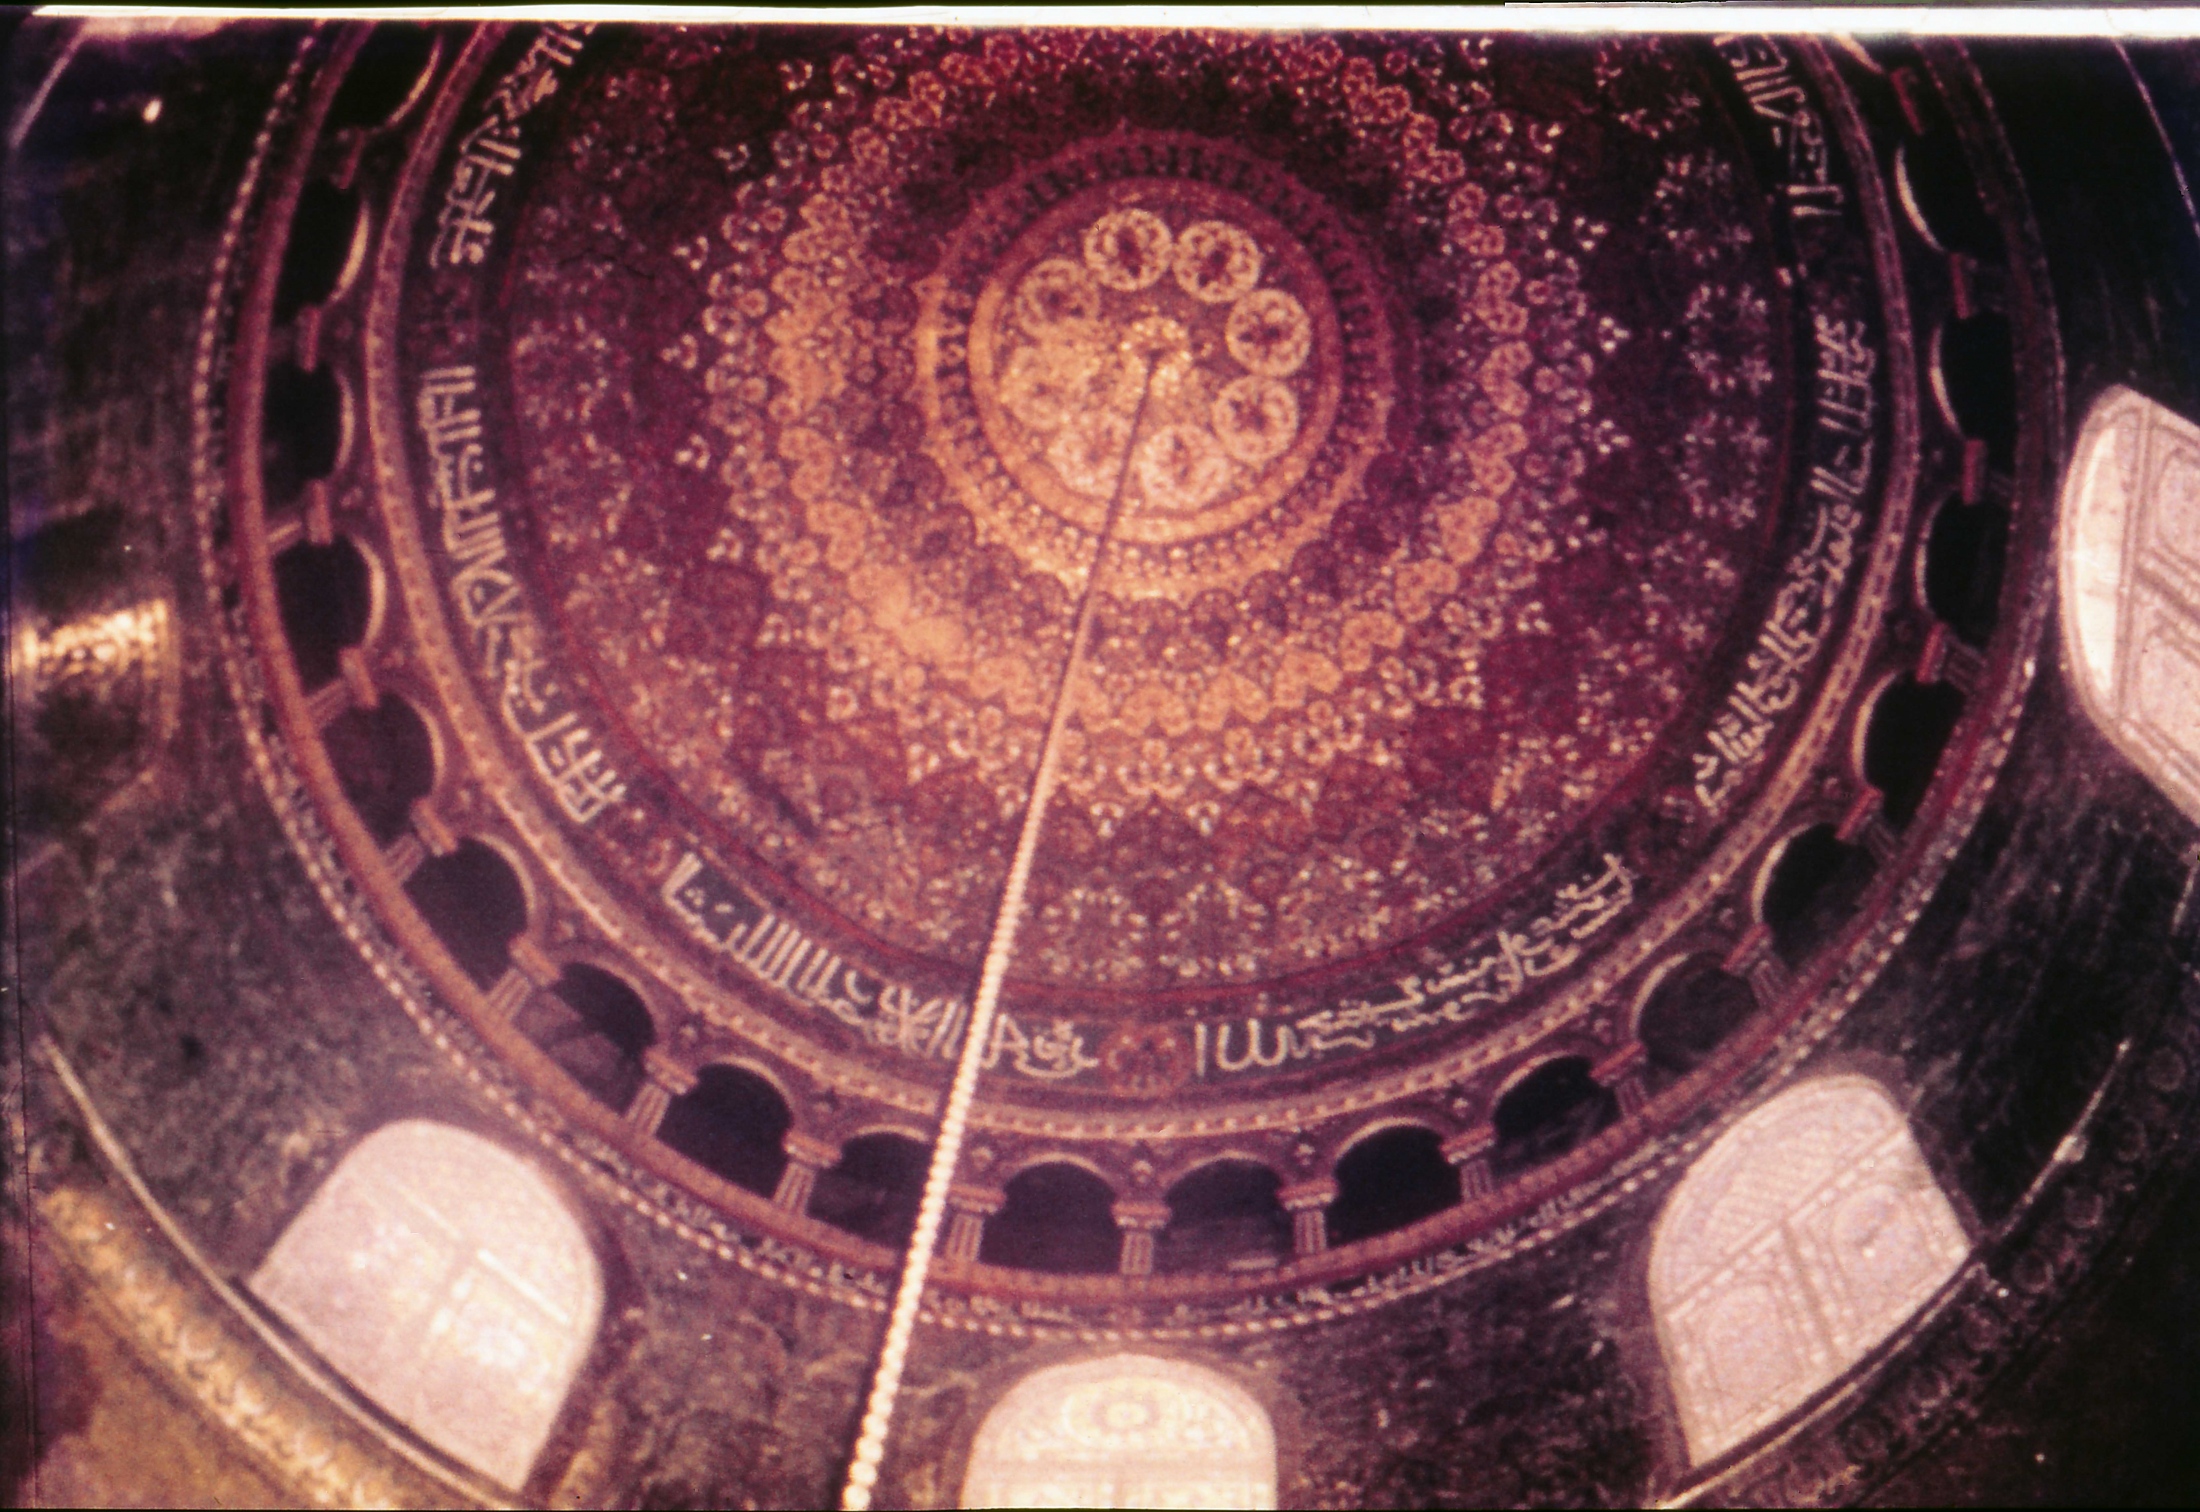 Mosaic inside Dome of the Rock